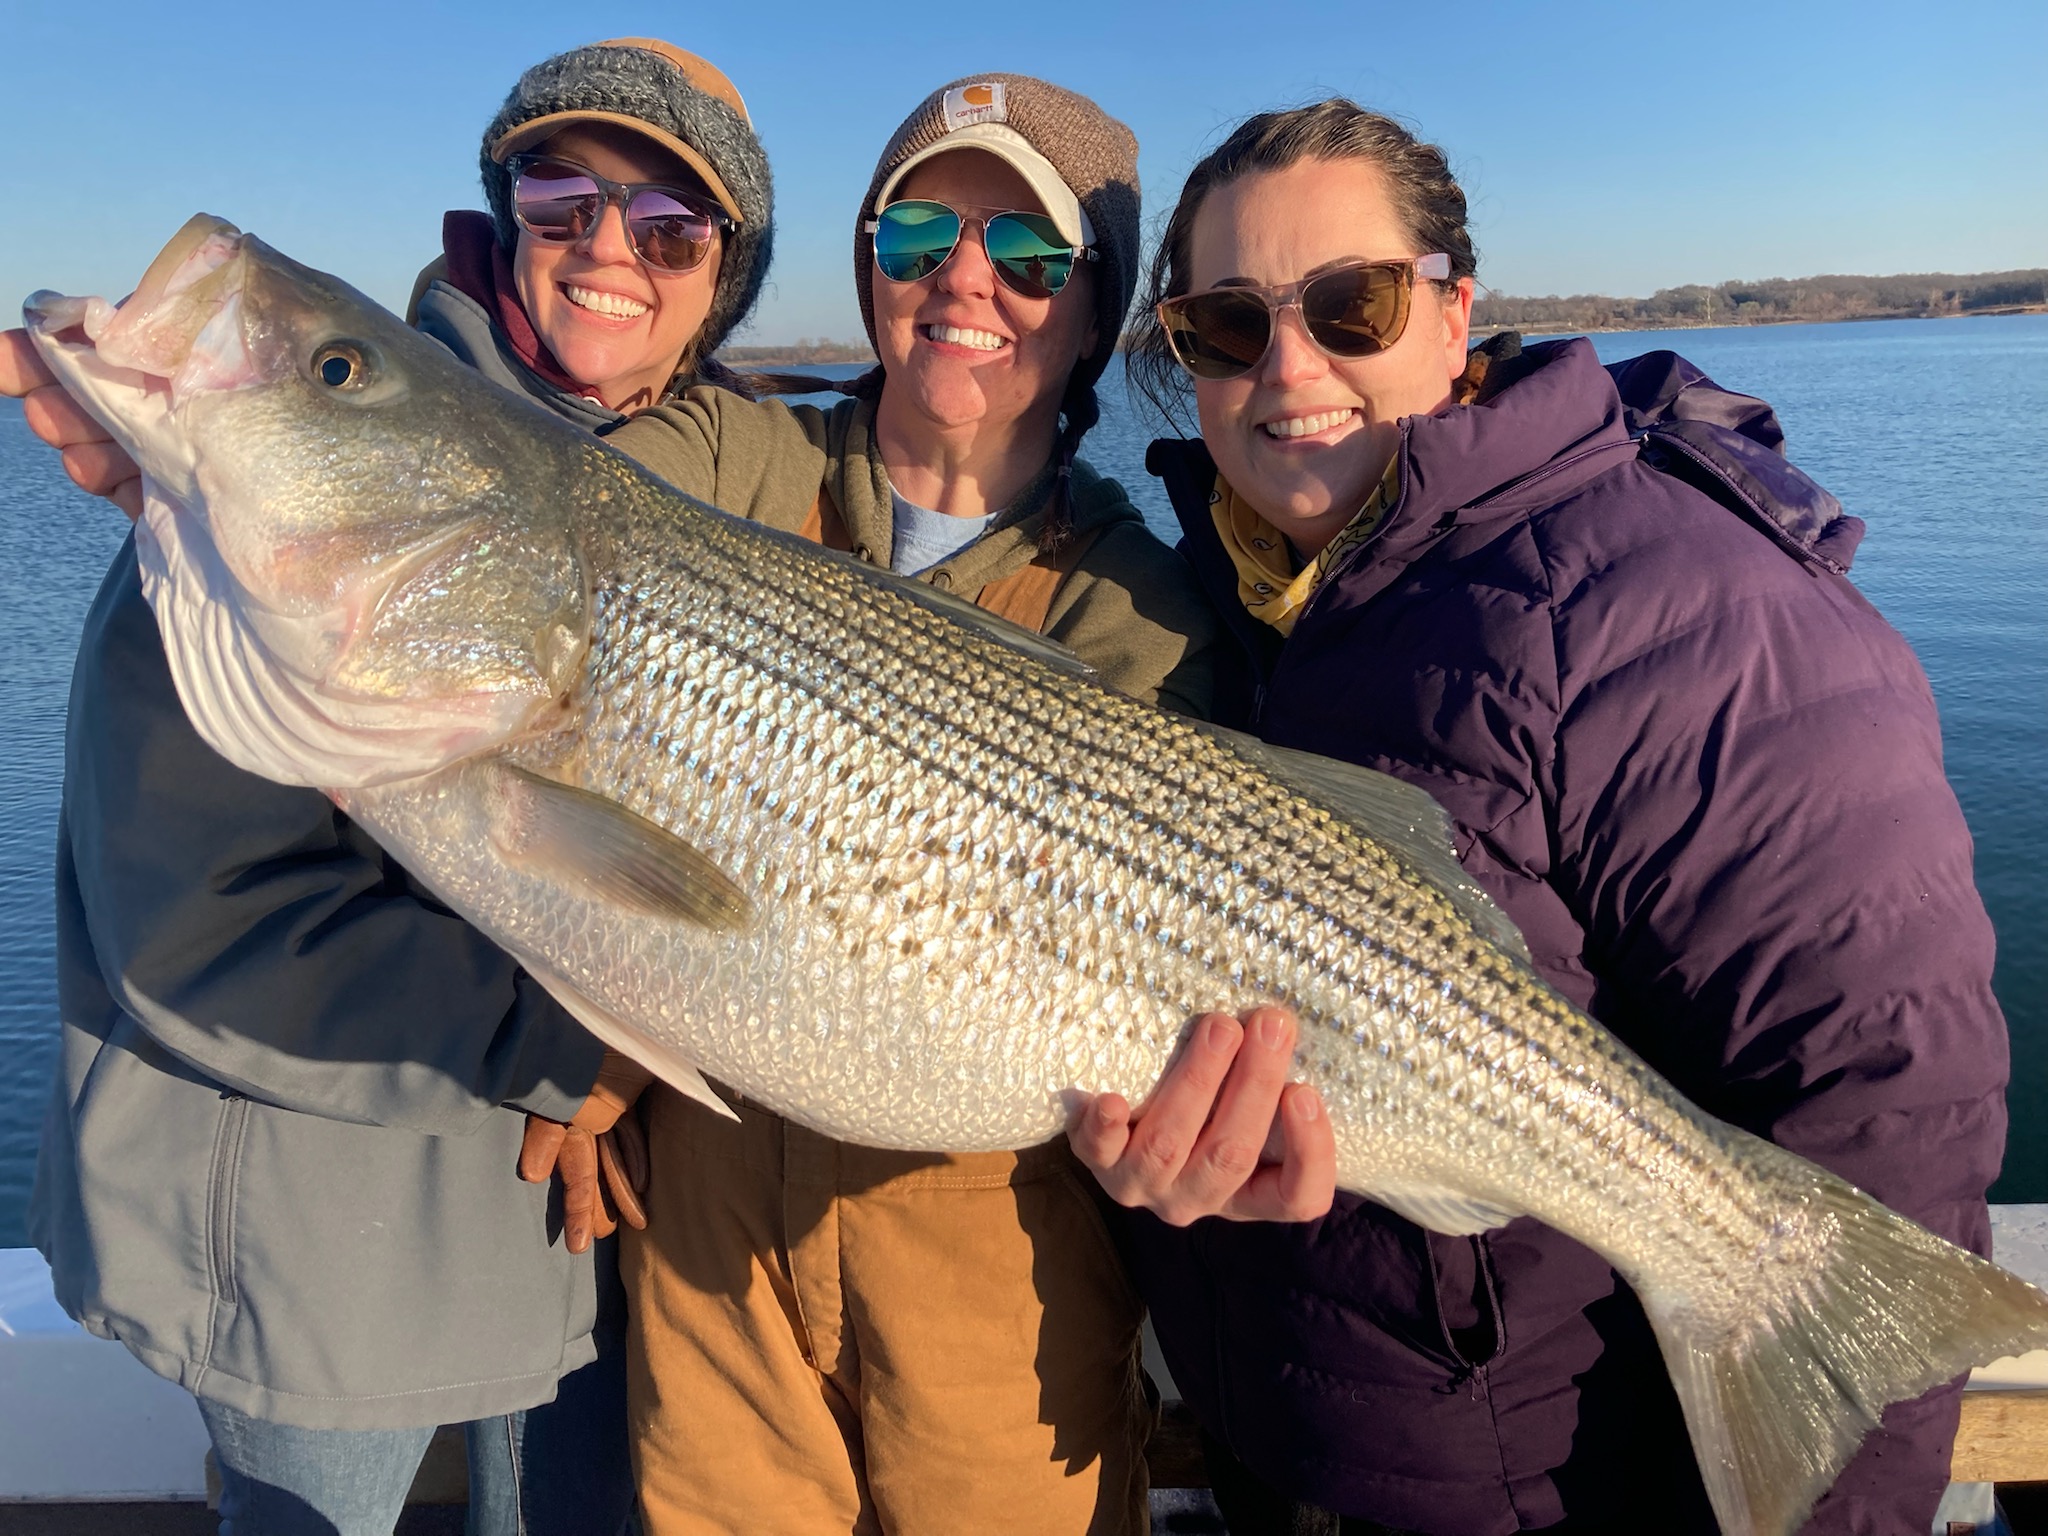 Lake Texoma ranked as best fisheries for striped bass